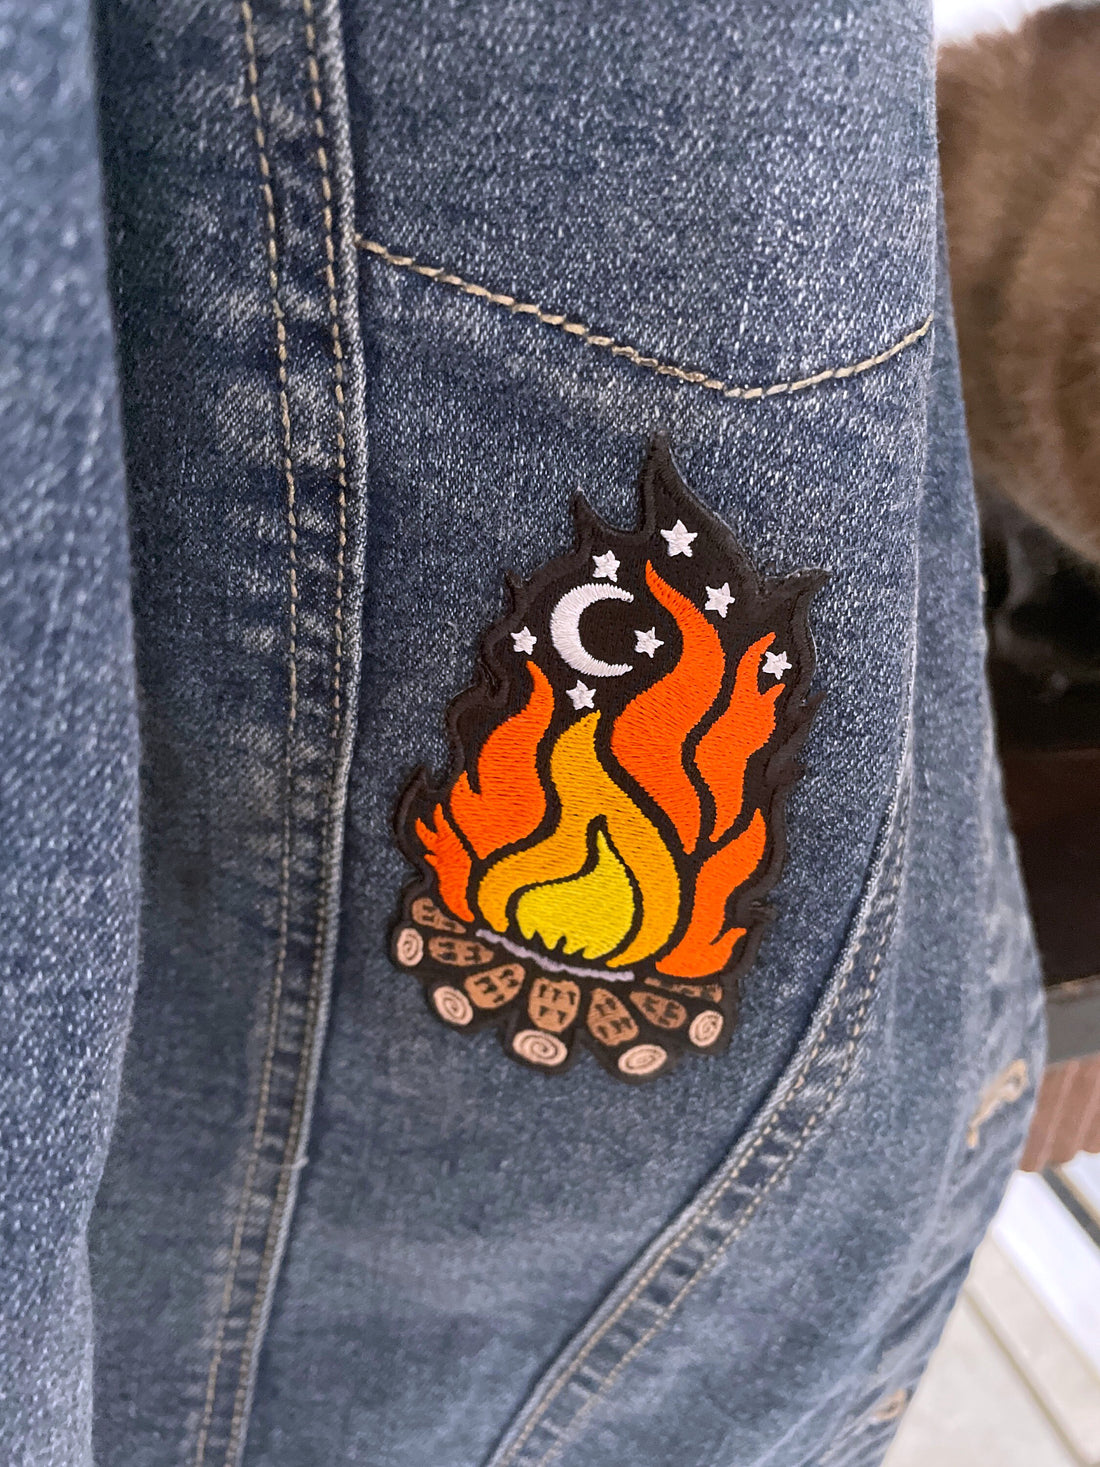 Creative Placement Ideas for Iron-On Patches